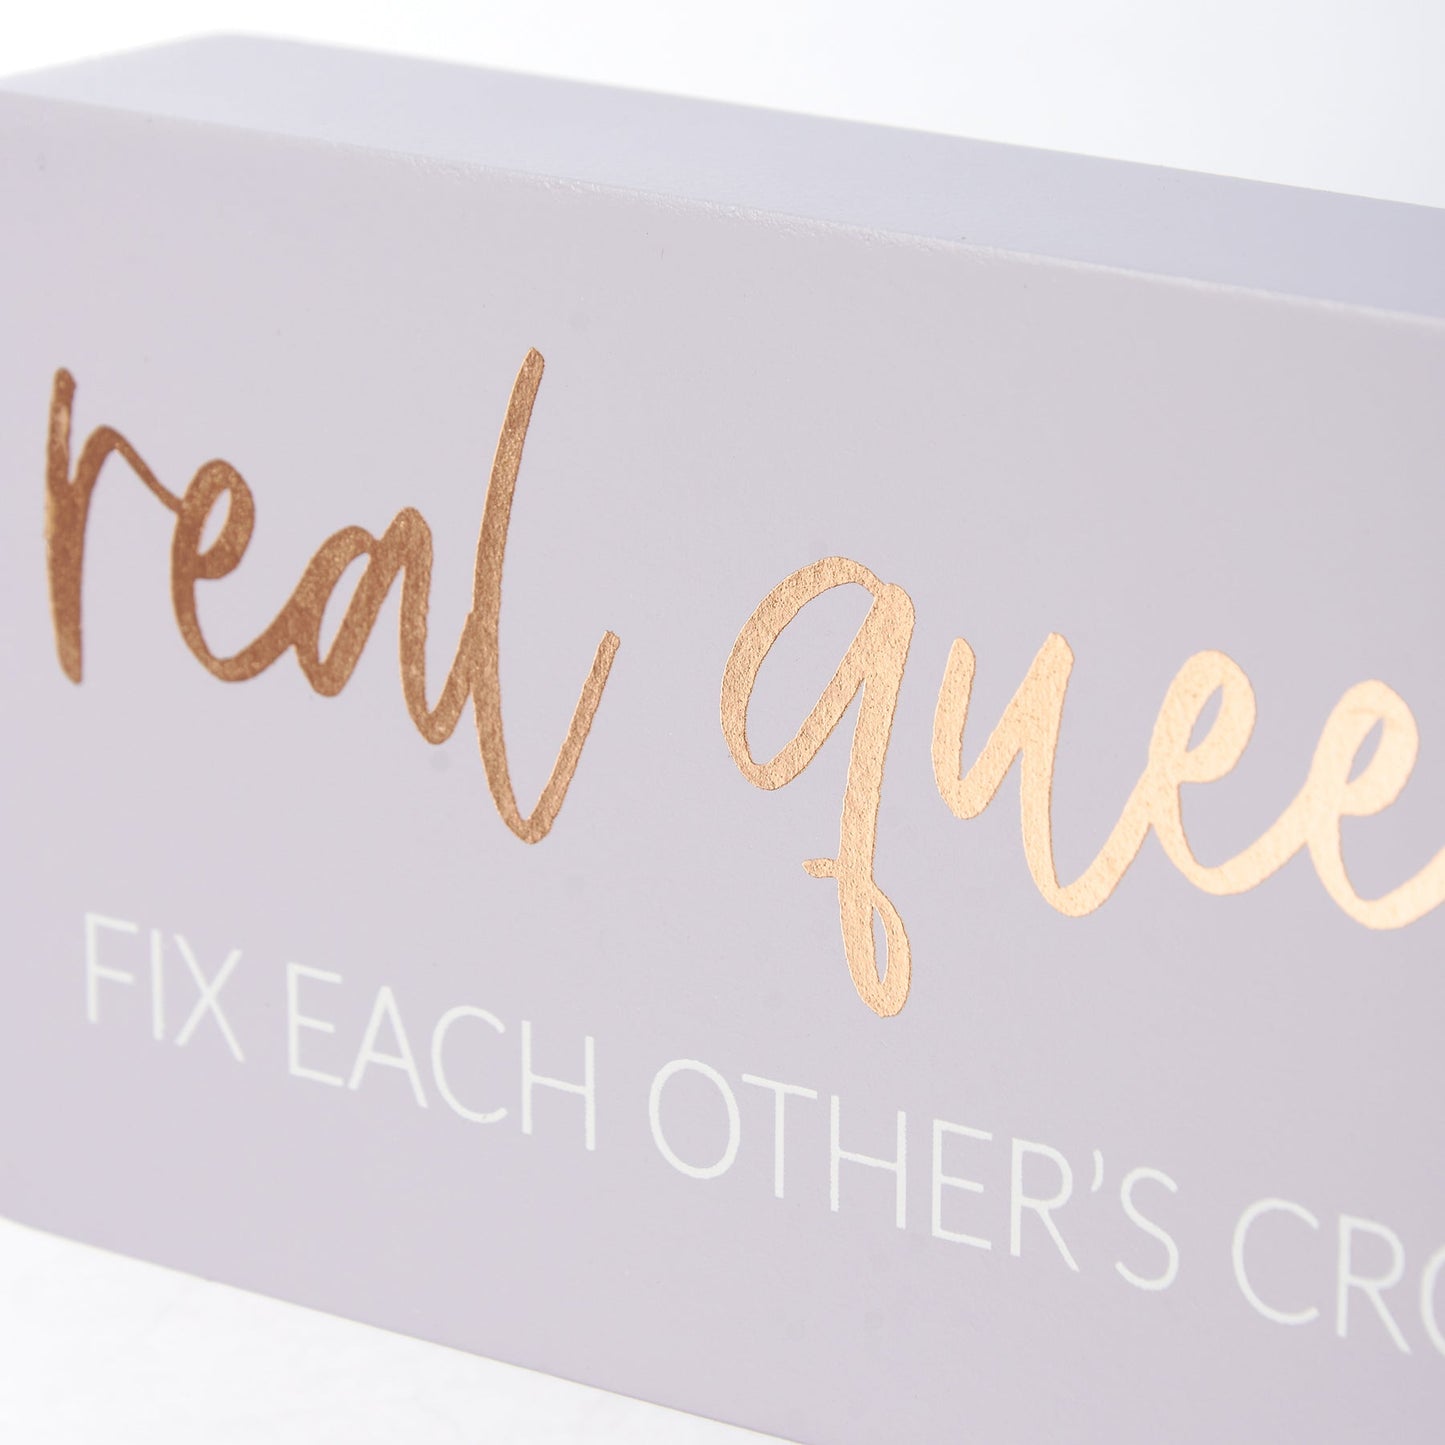 Real Queens Fix Each Other's Crowns Block Sign | Wooden Desk Wall Decor | 6" x 3"